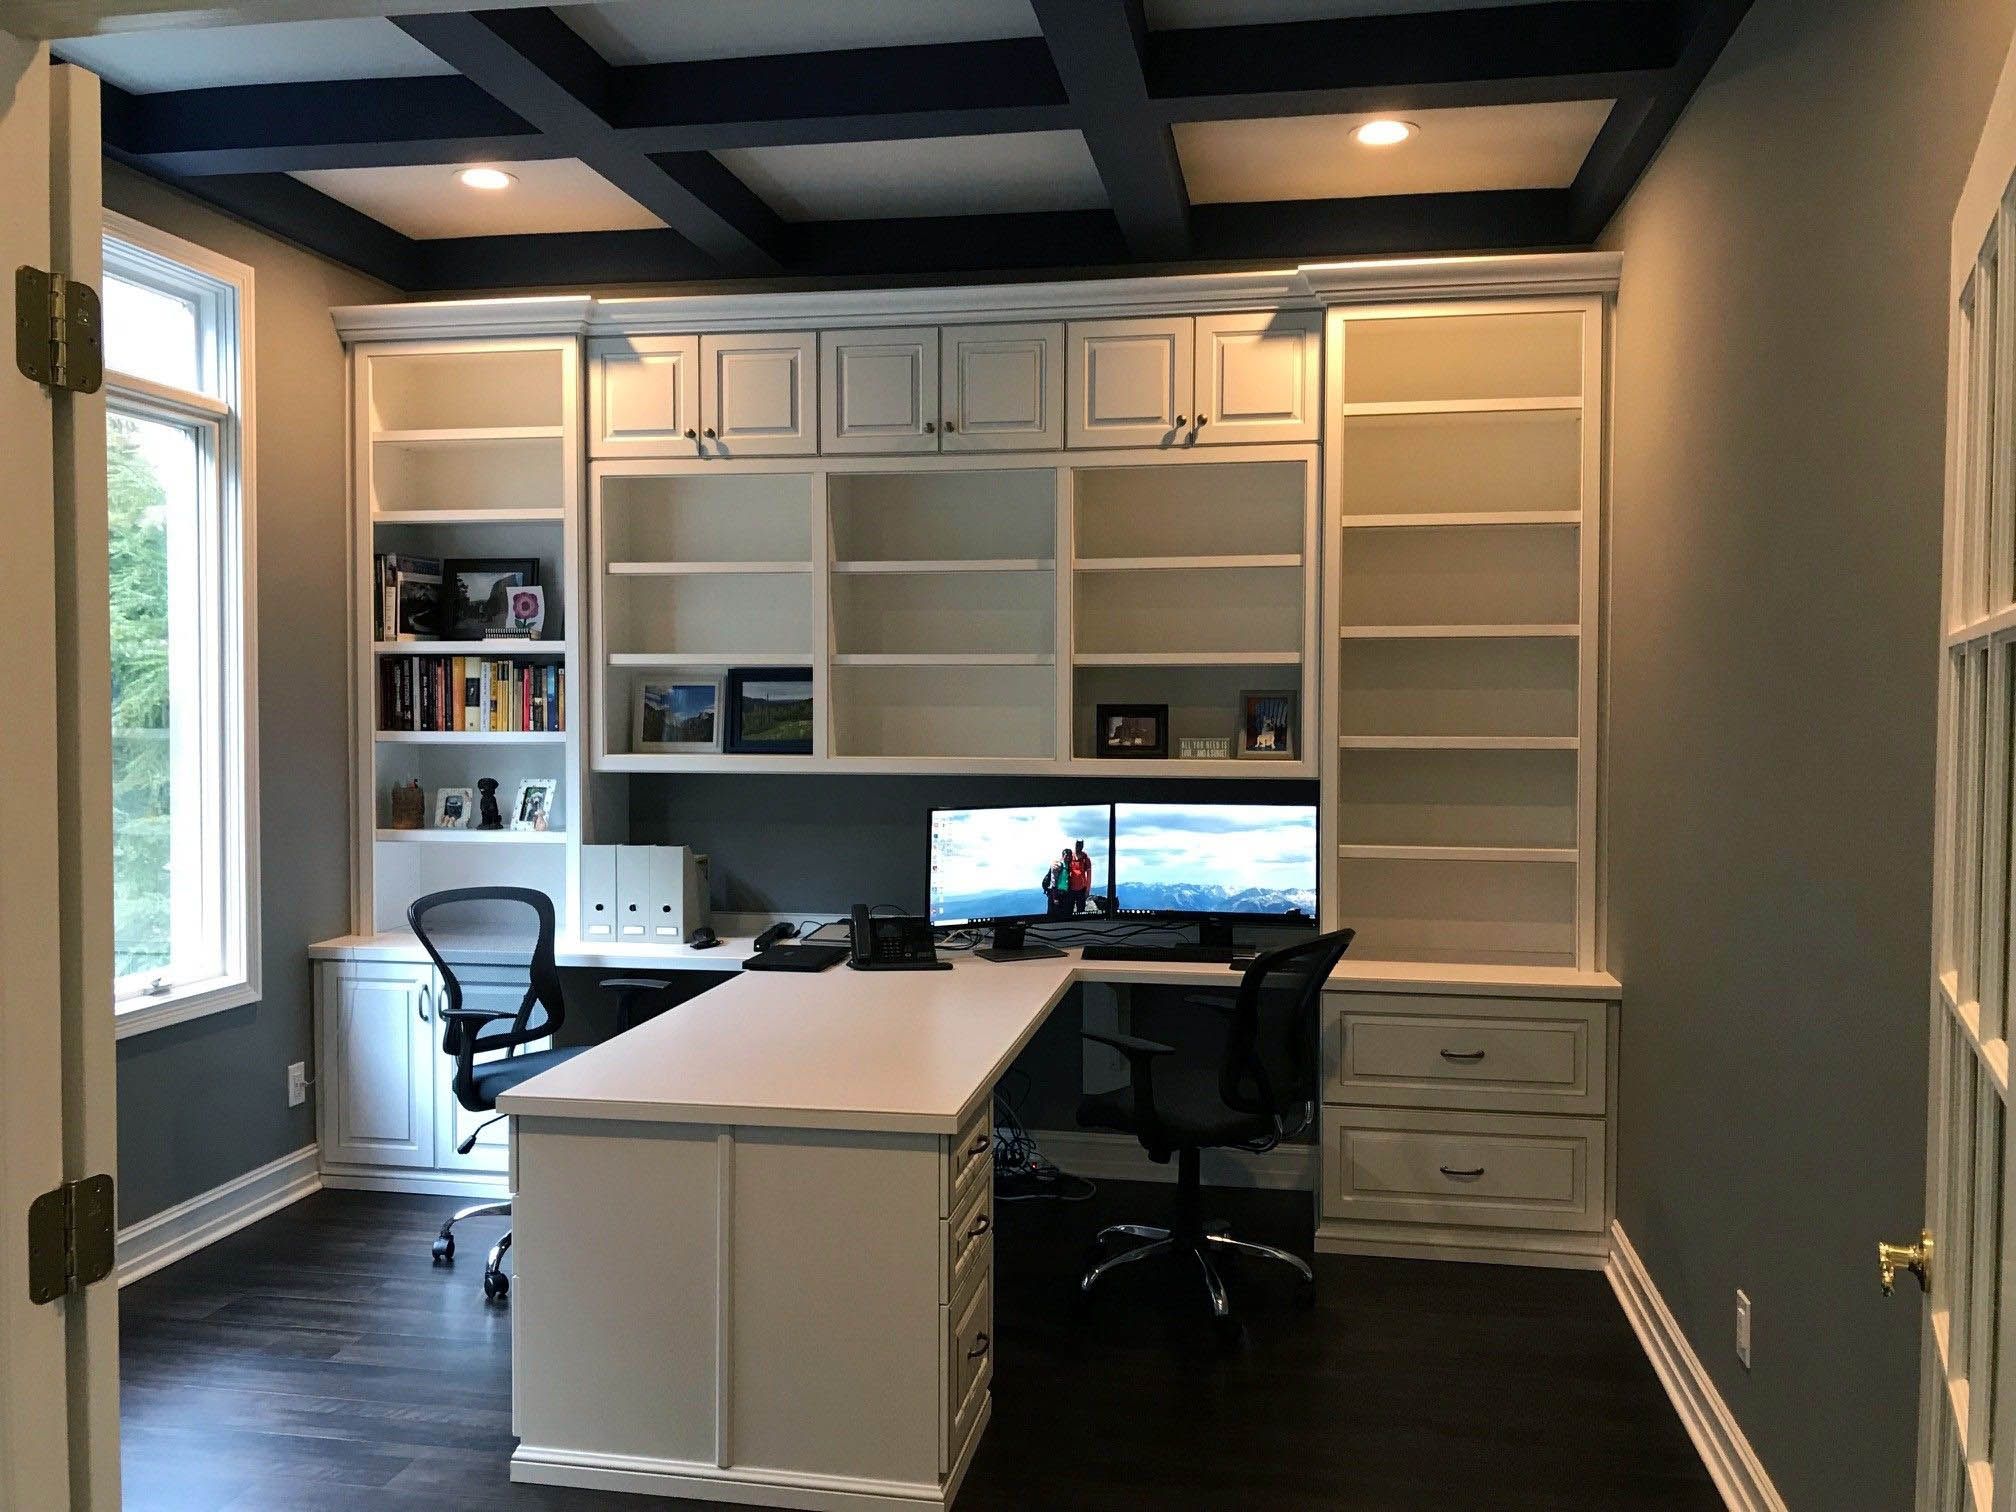 Stylish Home Office Desk With Storage